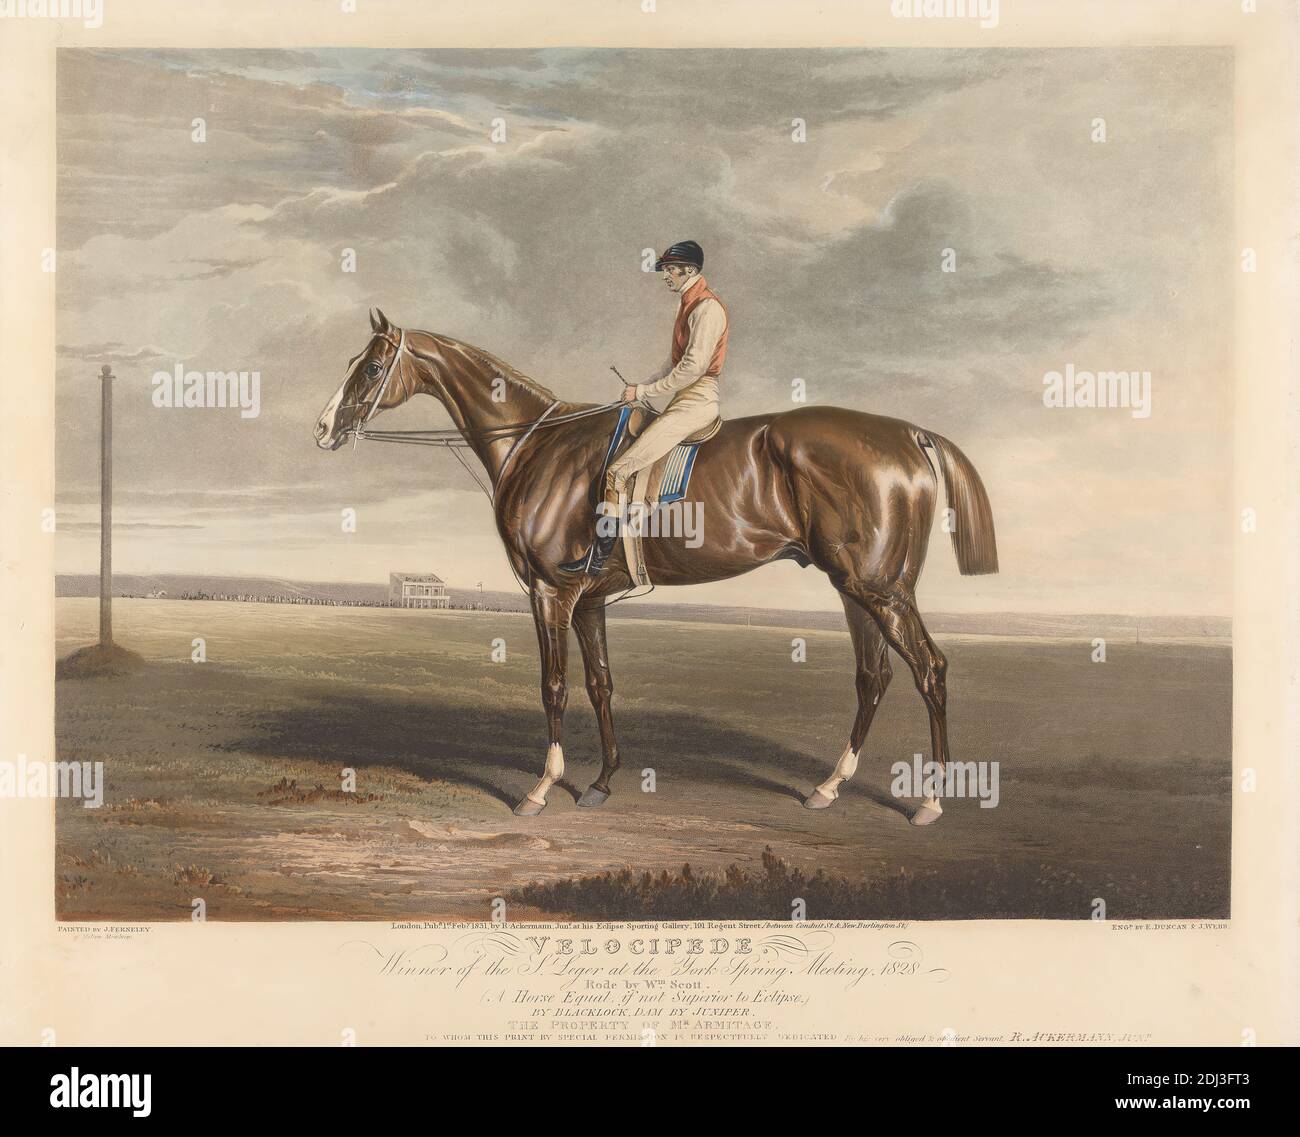 Velocipede. Winner of the St. Leger at the York Spring Meeting. 1828, Edward Duncan, 1803–1882, British, And John Webb, active 1830–1840, after John Ferneley, 1782–1860, British, 1828, Aquatint, hand-colored, Sheet: 12 1/4 x 16 1/2in. (31.1 x 41.9cm Stock Photo